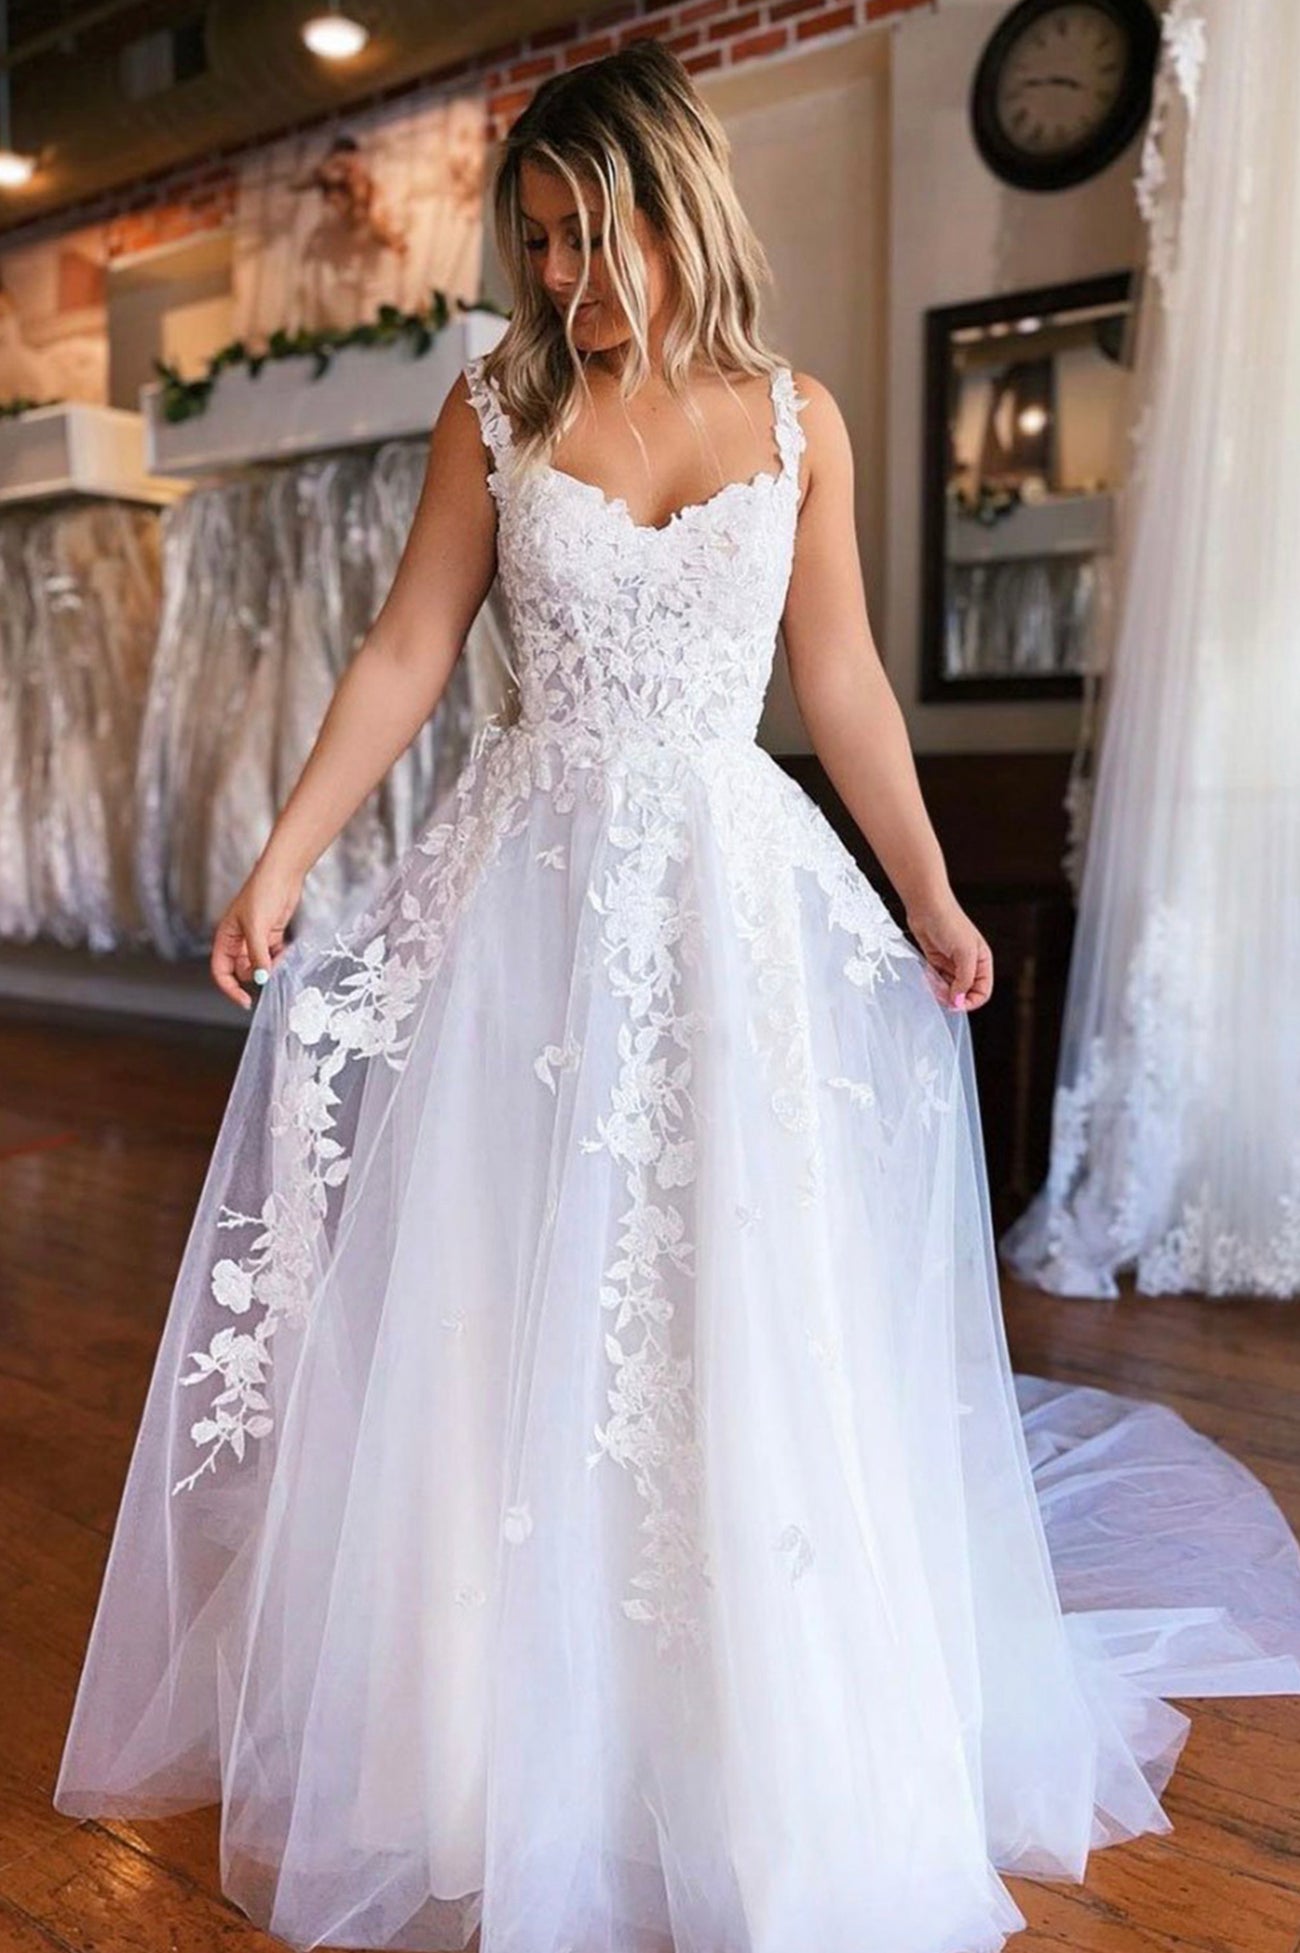 Stylish White Lace Prom Dress with Shoes